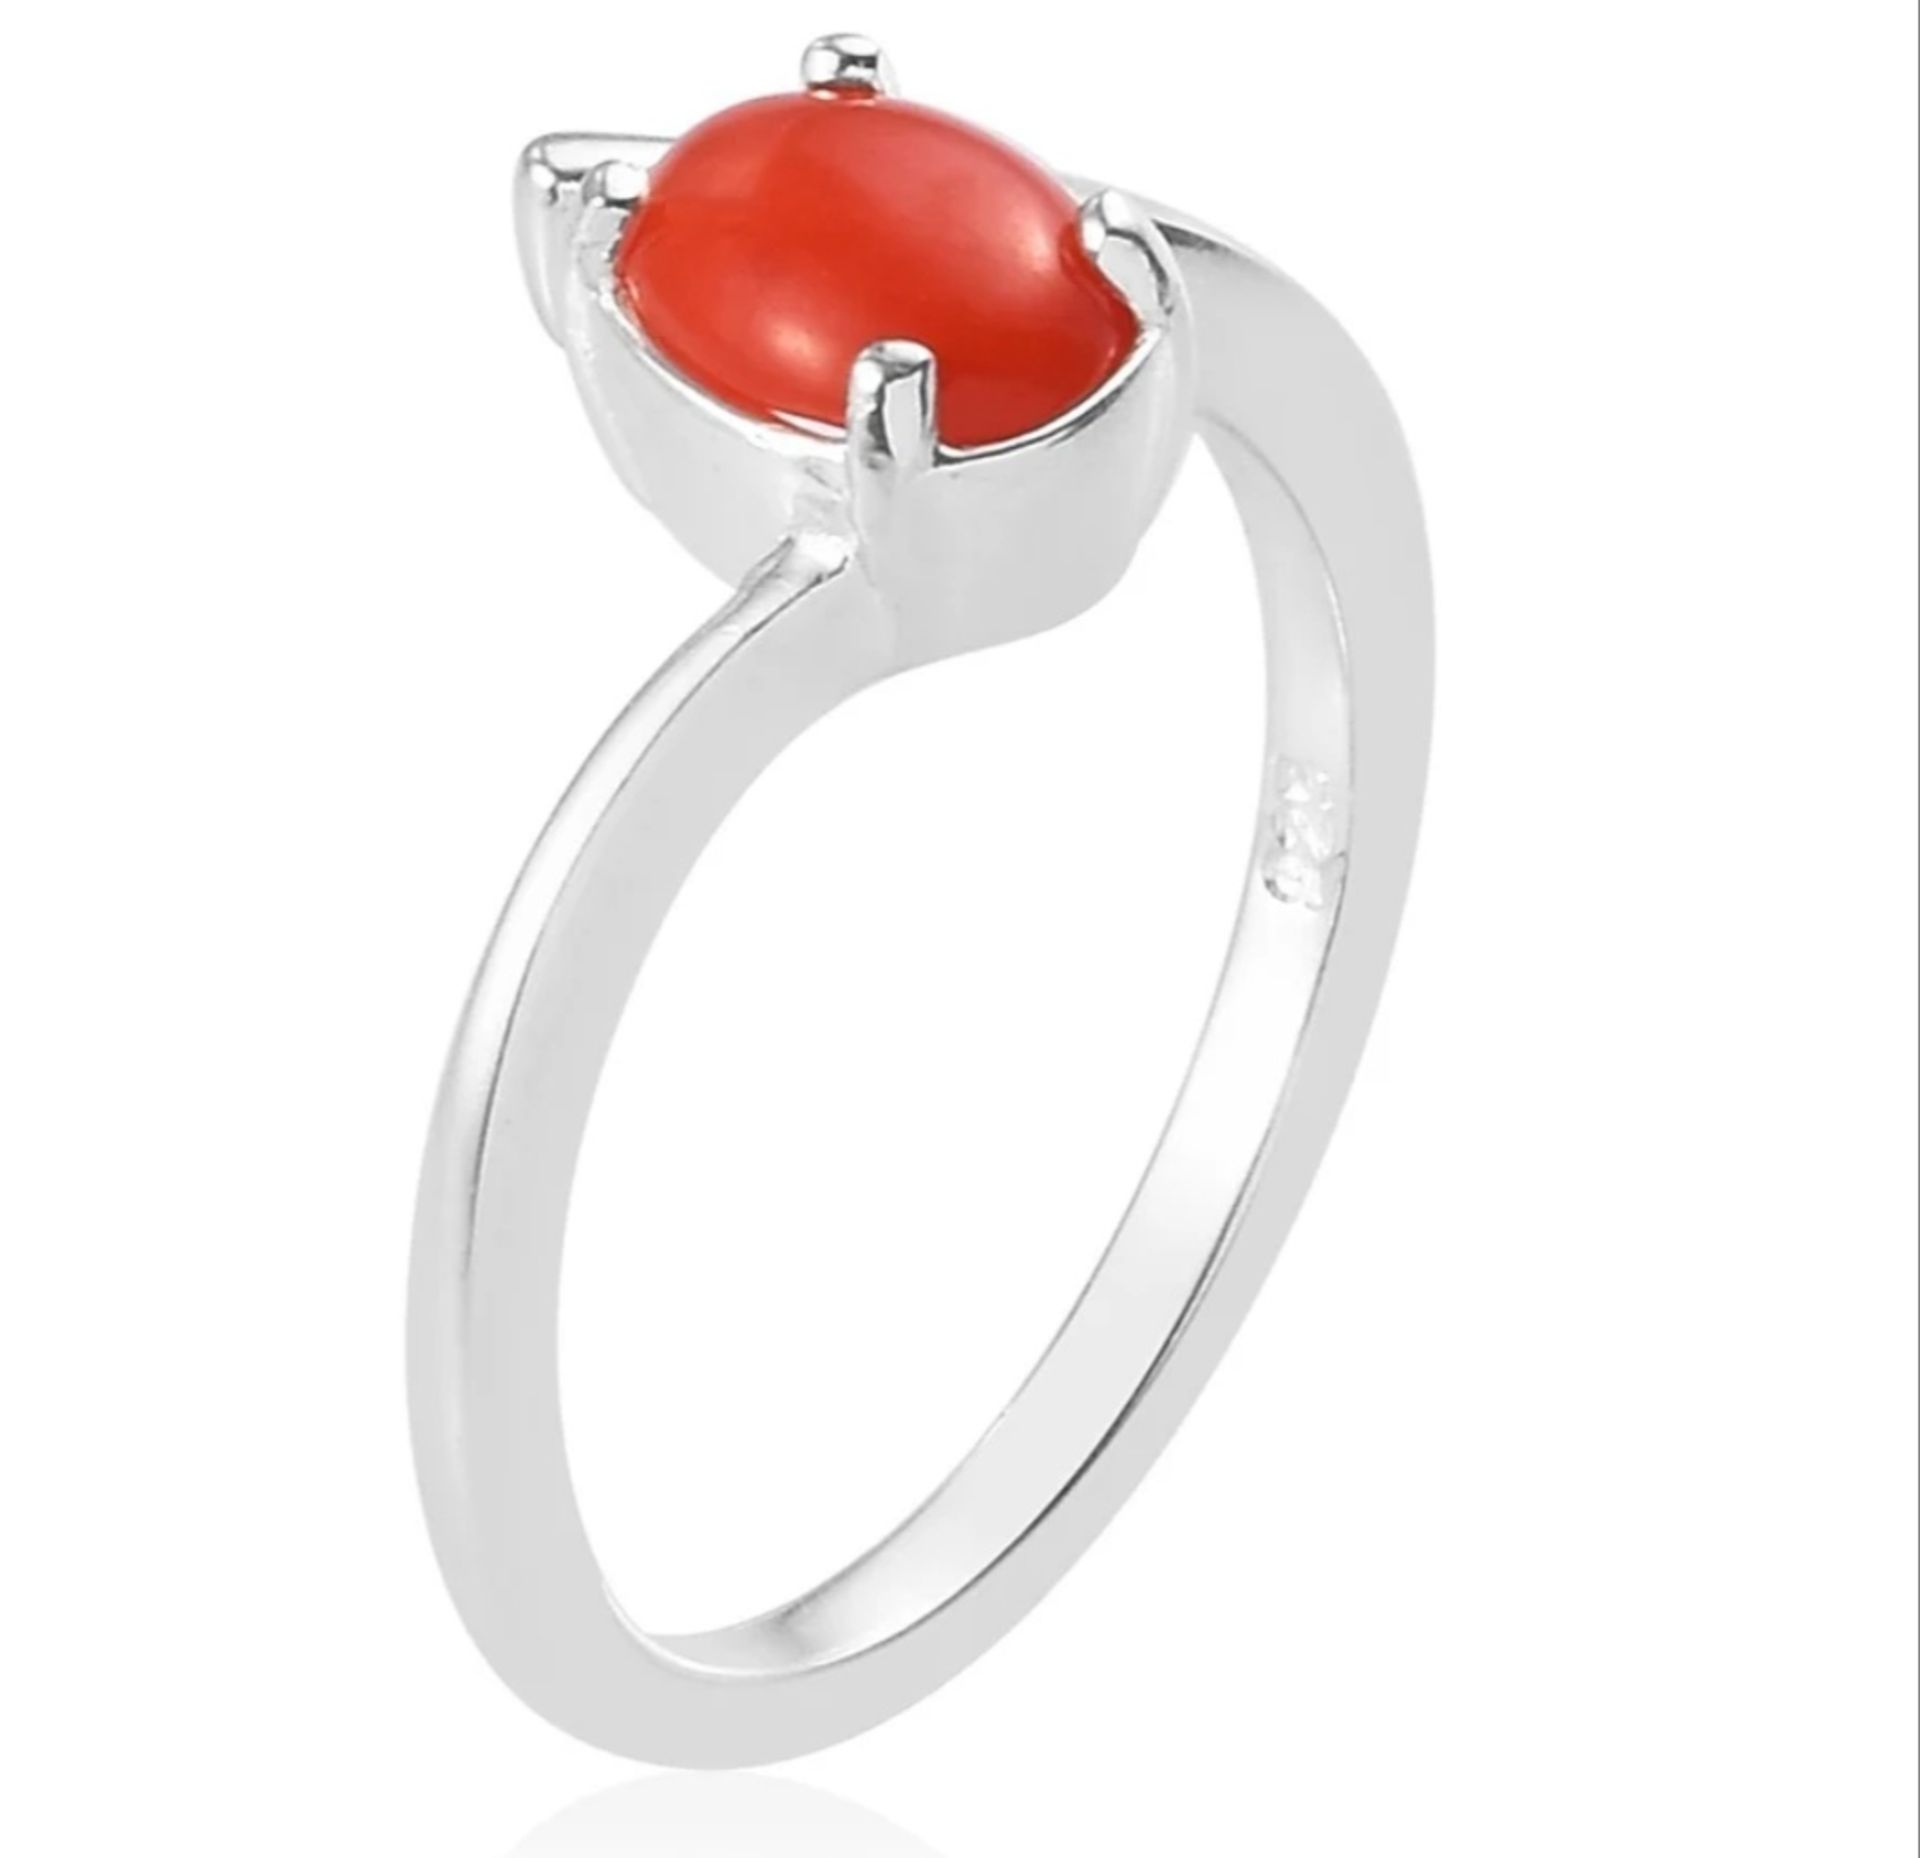 New! Natural Coral Ring & Earrings In Sterling Silver - Image 2 of 6